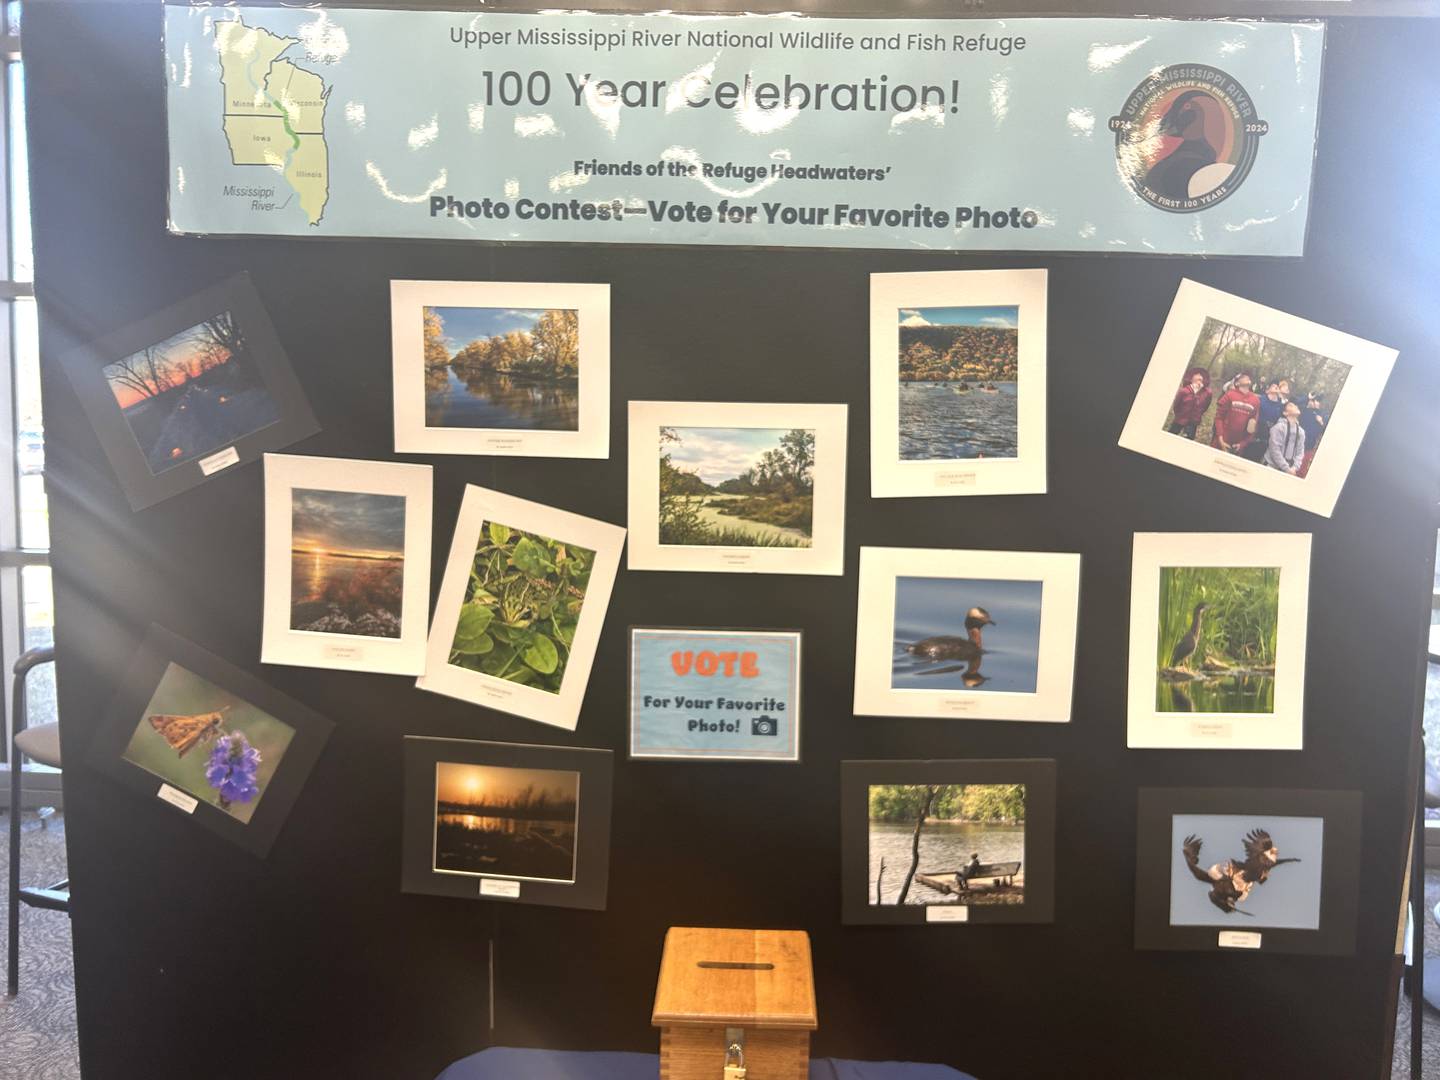 This display, marking the 100th anniversary of the Upper Mississippi River National Wildlife and Fish Refuge, was one of the displays at Clinton Community College, in Clinton, Iowa during the 40th Annual Bald Eagle Watch on Saturday, Feb. 17, 2024.